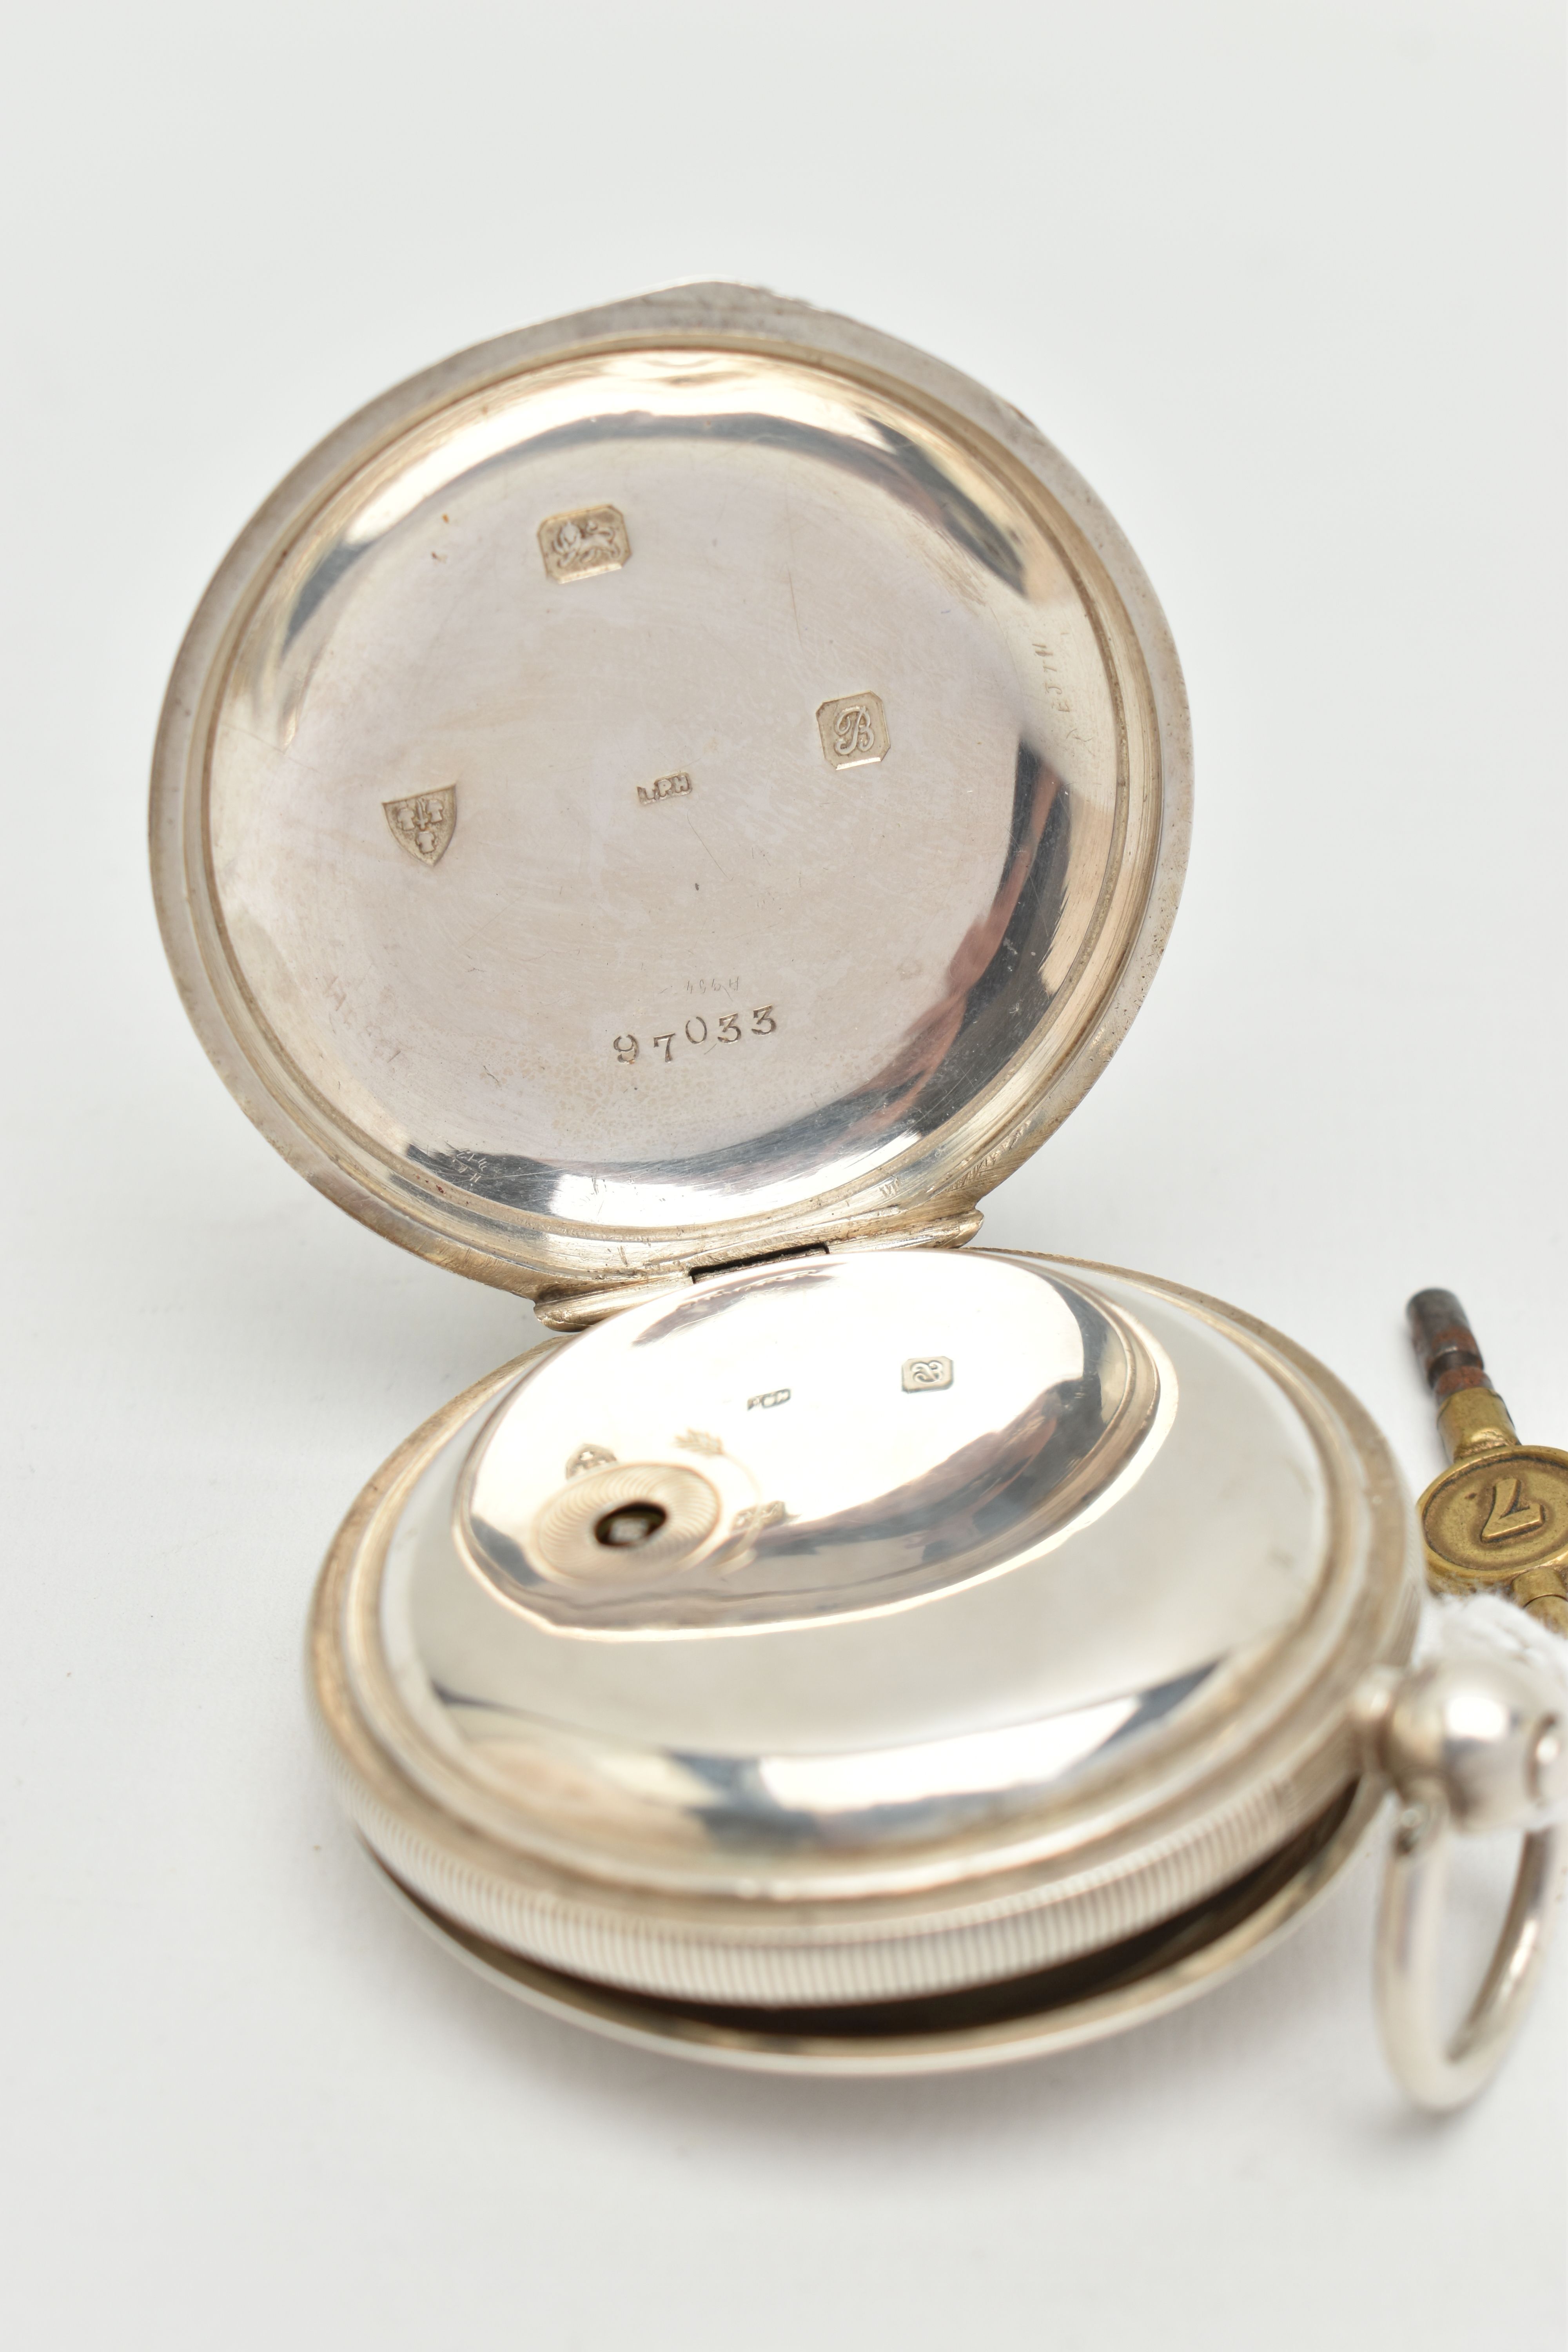 AN EDWARDIAN SILVER FULL HUNTER POCKET WATCH, key wound movement, Roman numerals, second - Image 4 of 6